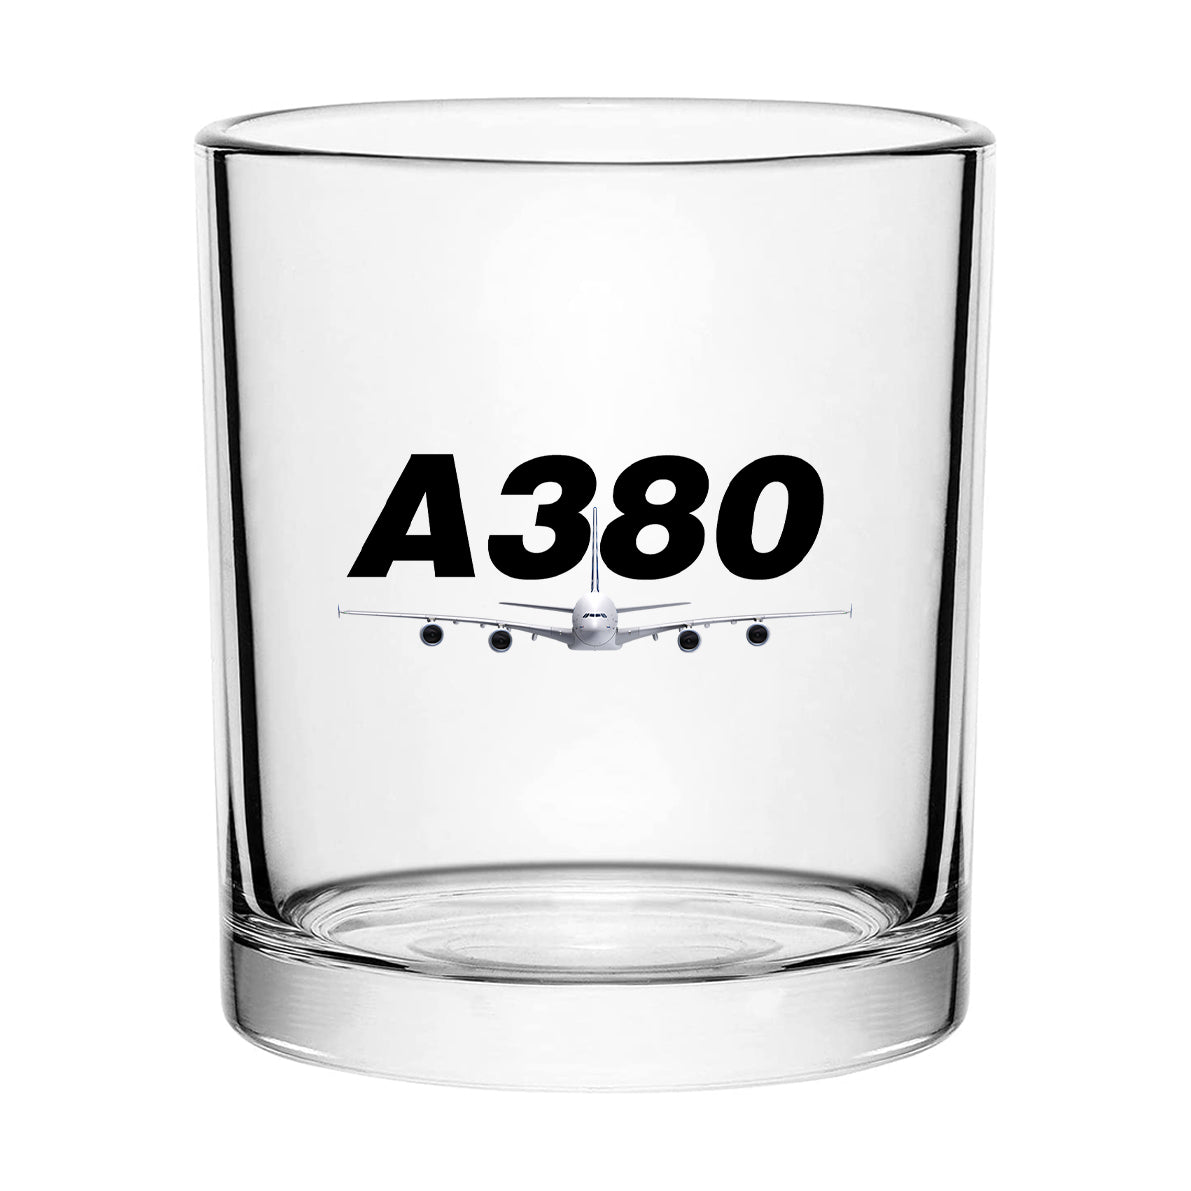 Super Airbus A380 Designed Special Whiskey Glasses